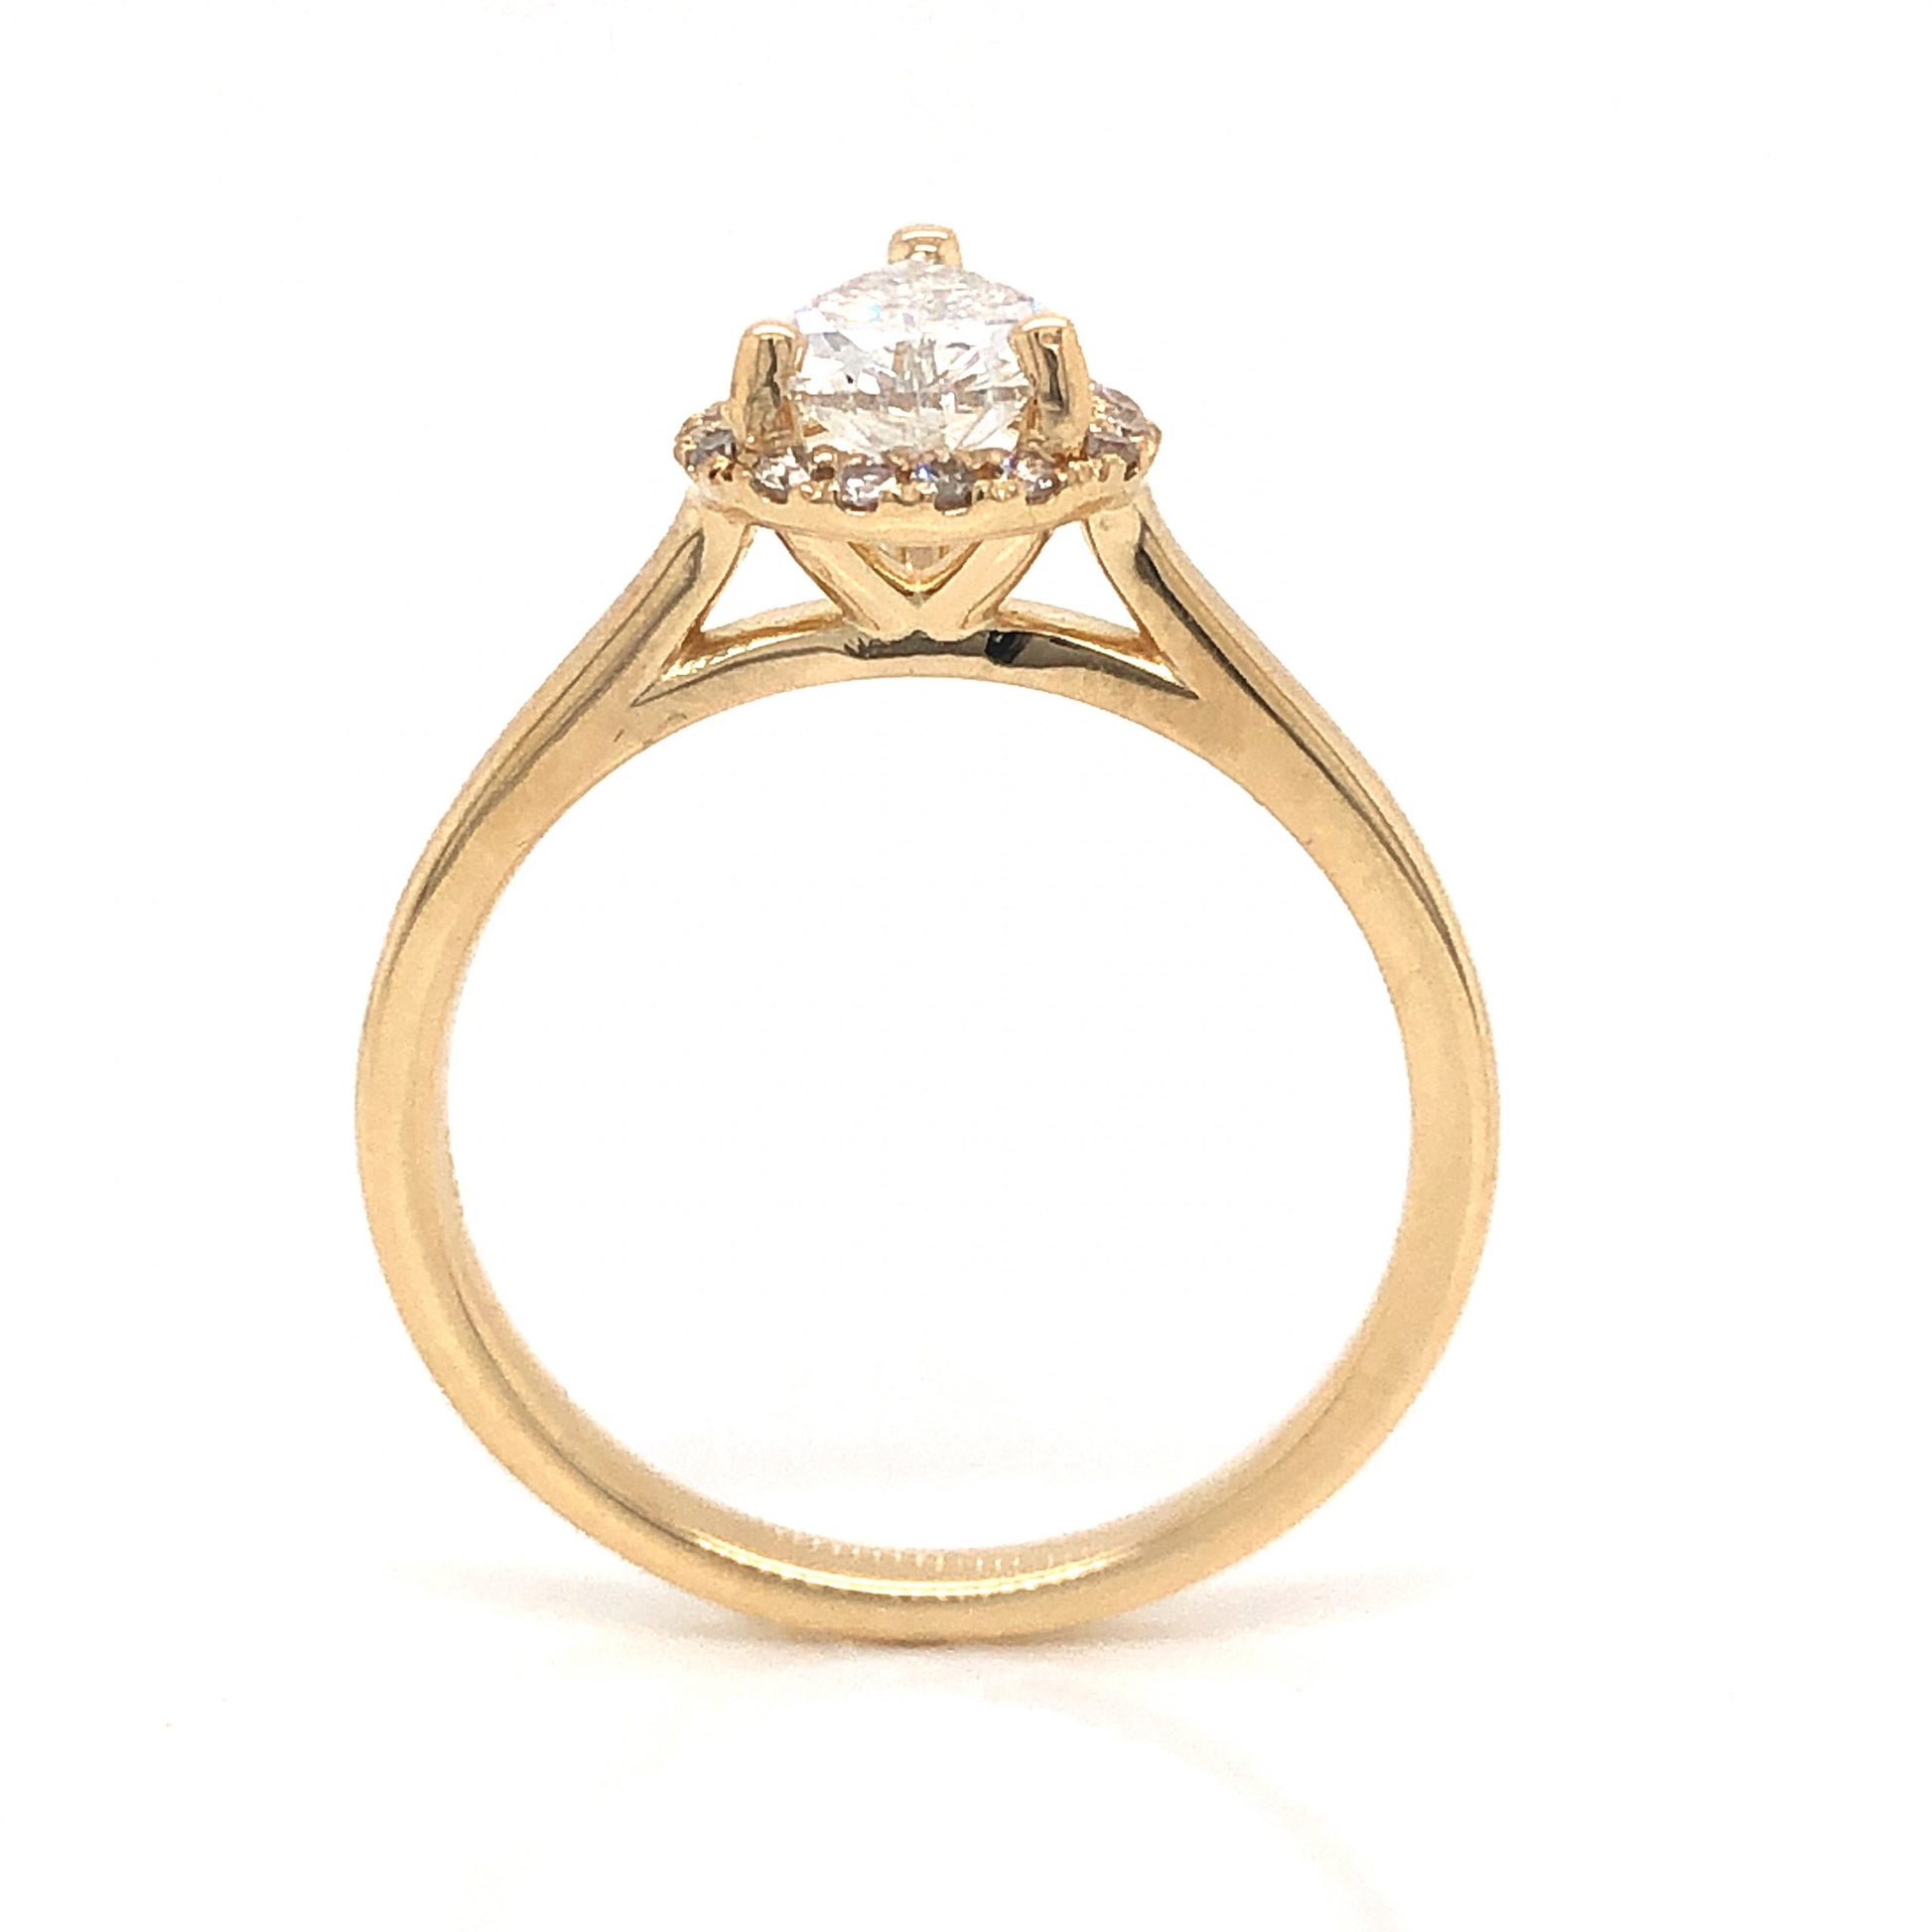 Pear Cut Diamond Halo Engagement Ring in 14k Yellow Gold